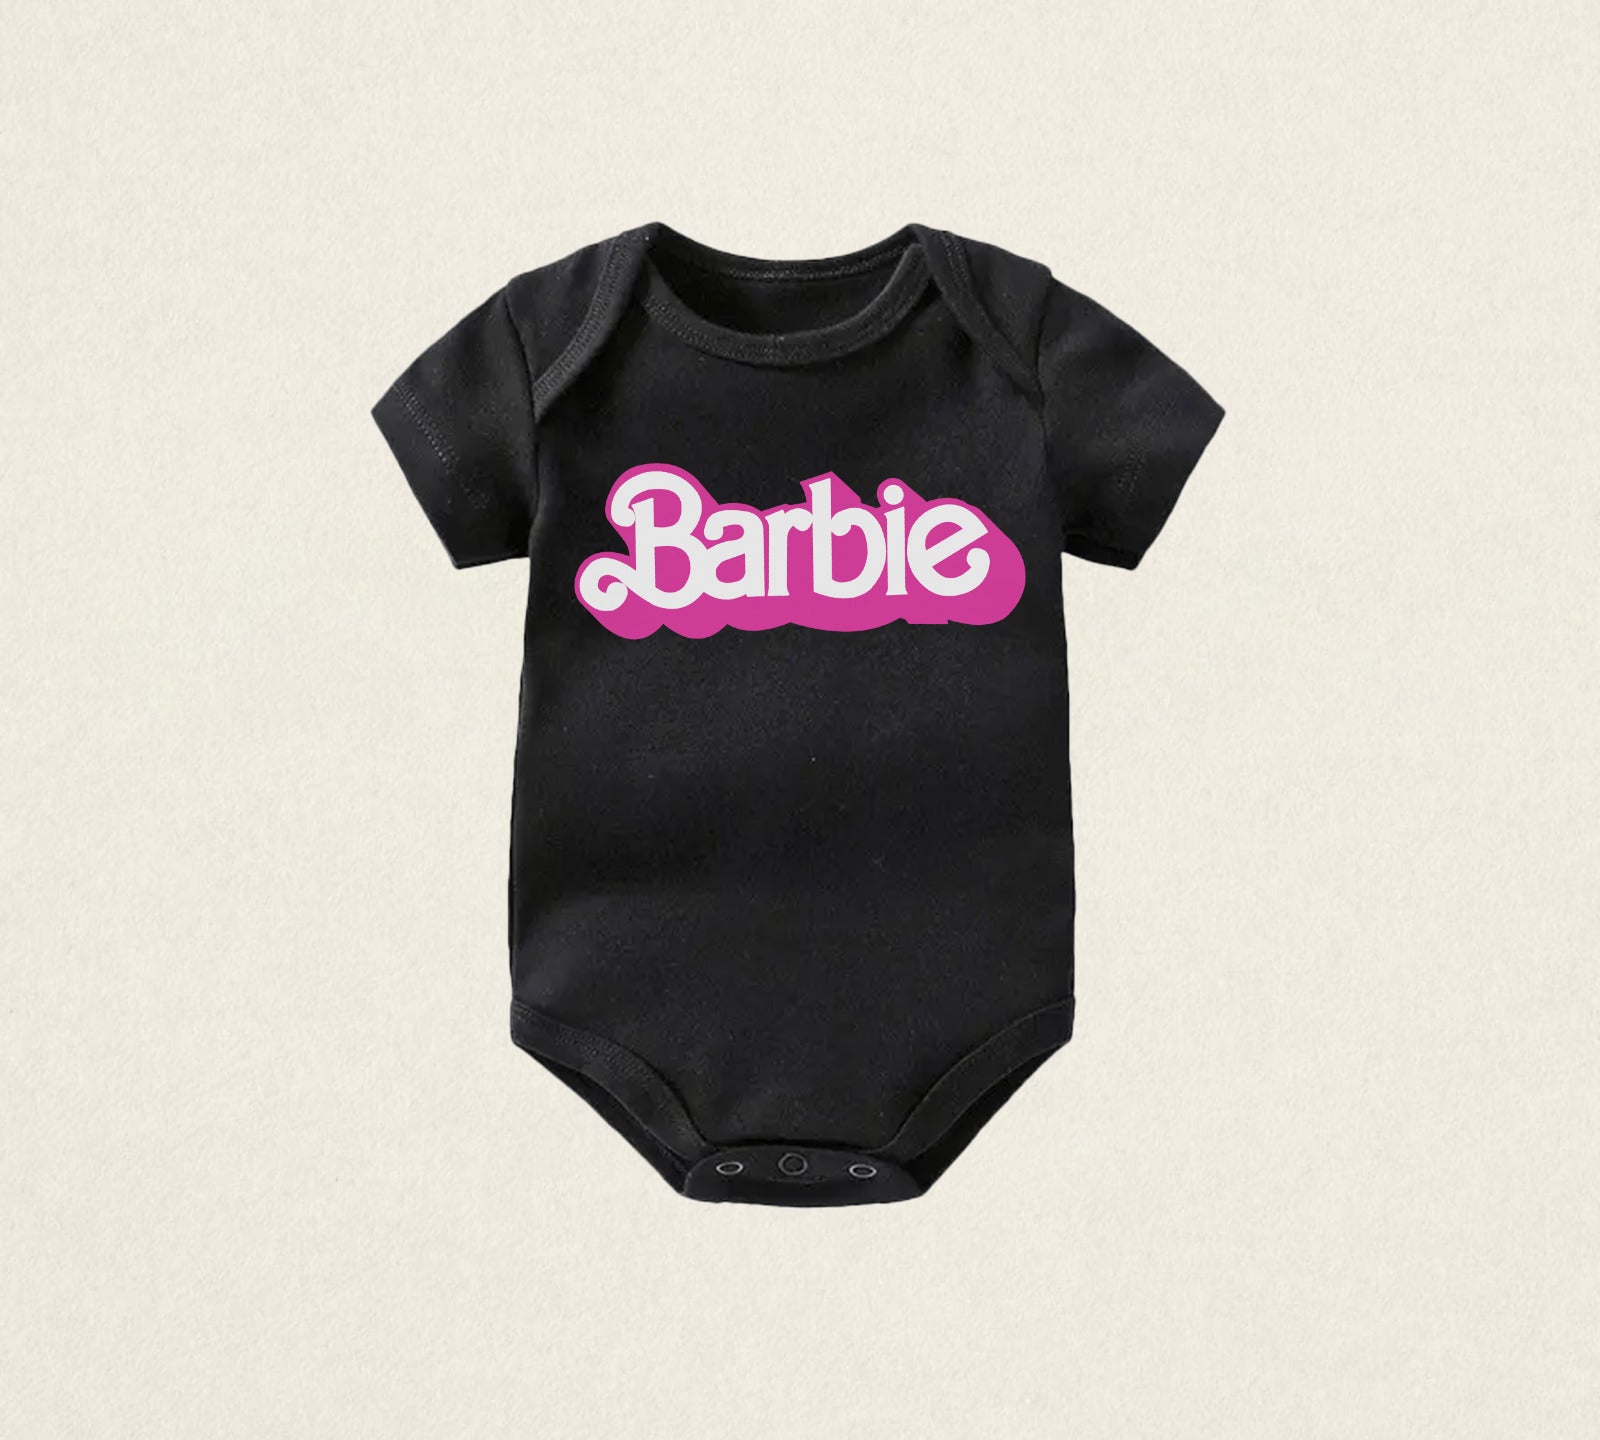 Barbie Baby Bodysuits for Sale